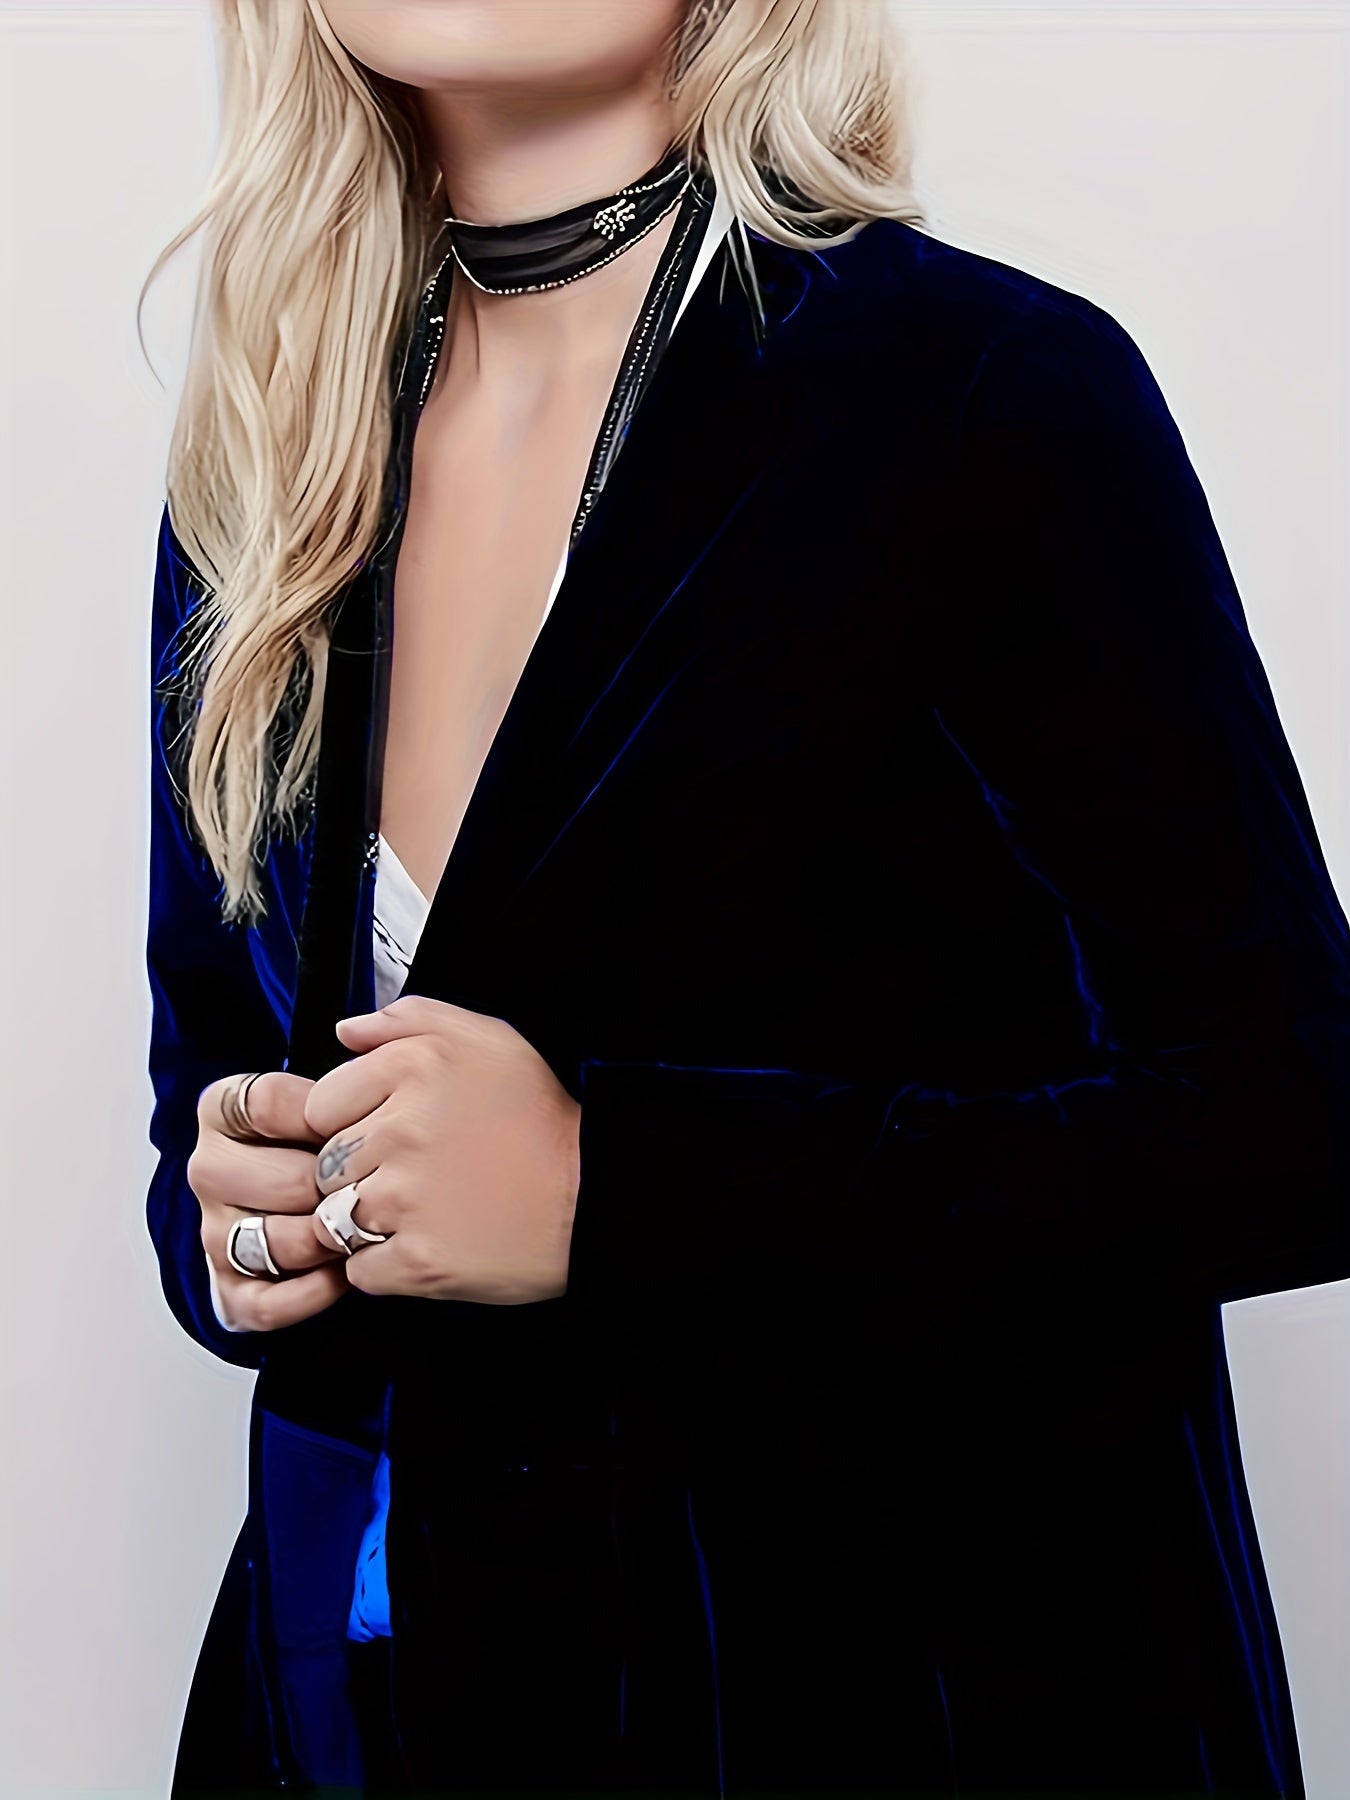 A person with long blonde hair wearing a Maramalive™ Women's Plus Solid Velvet Long Sleeve Open Front Ruffle Trim Longline Cardigan, white top, multiple rings, and two black chokers stands against a plain background. The outfit's medium stretch fabric ensures both comfort and style.